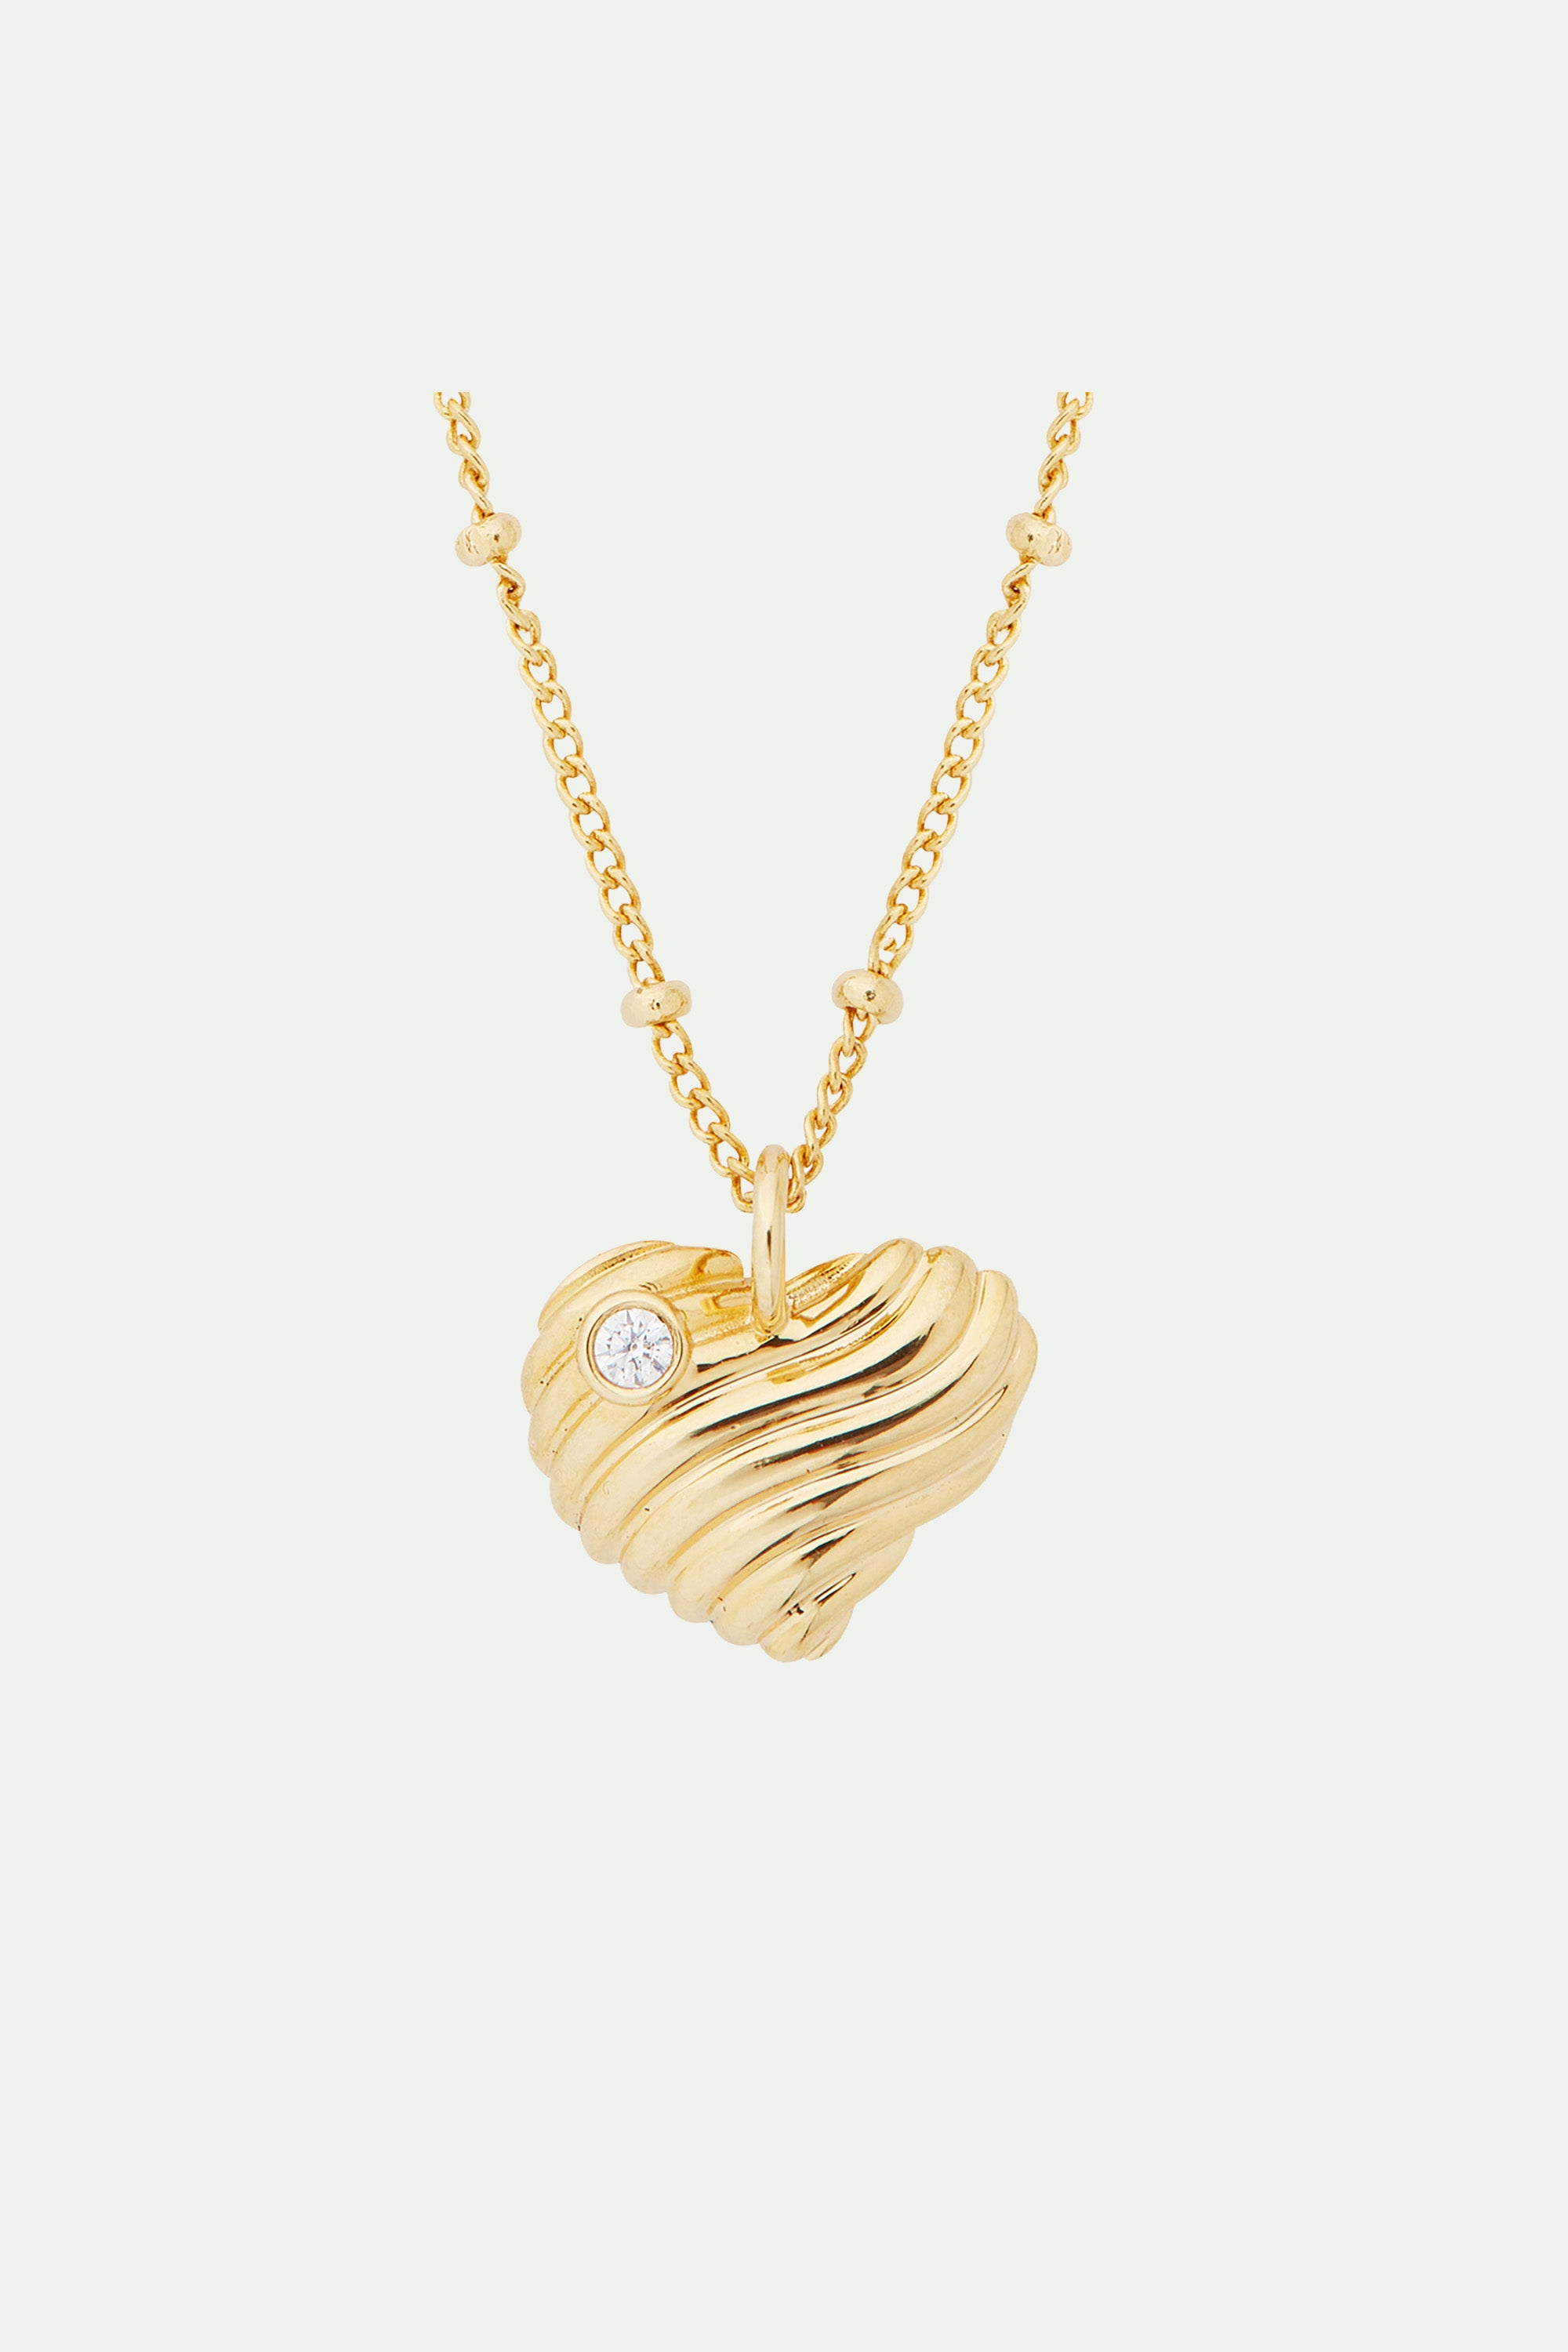 Ripple effect heart and cubic zirconia pendant necklace